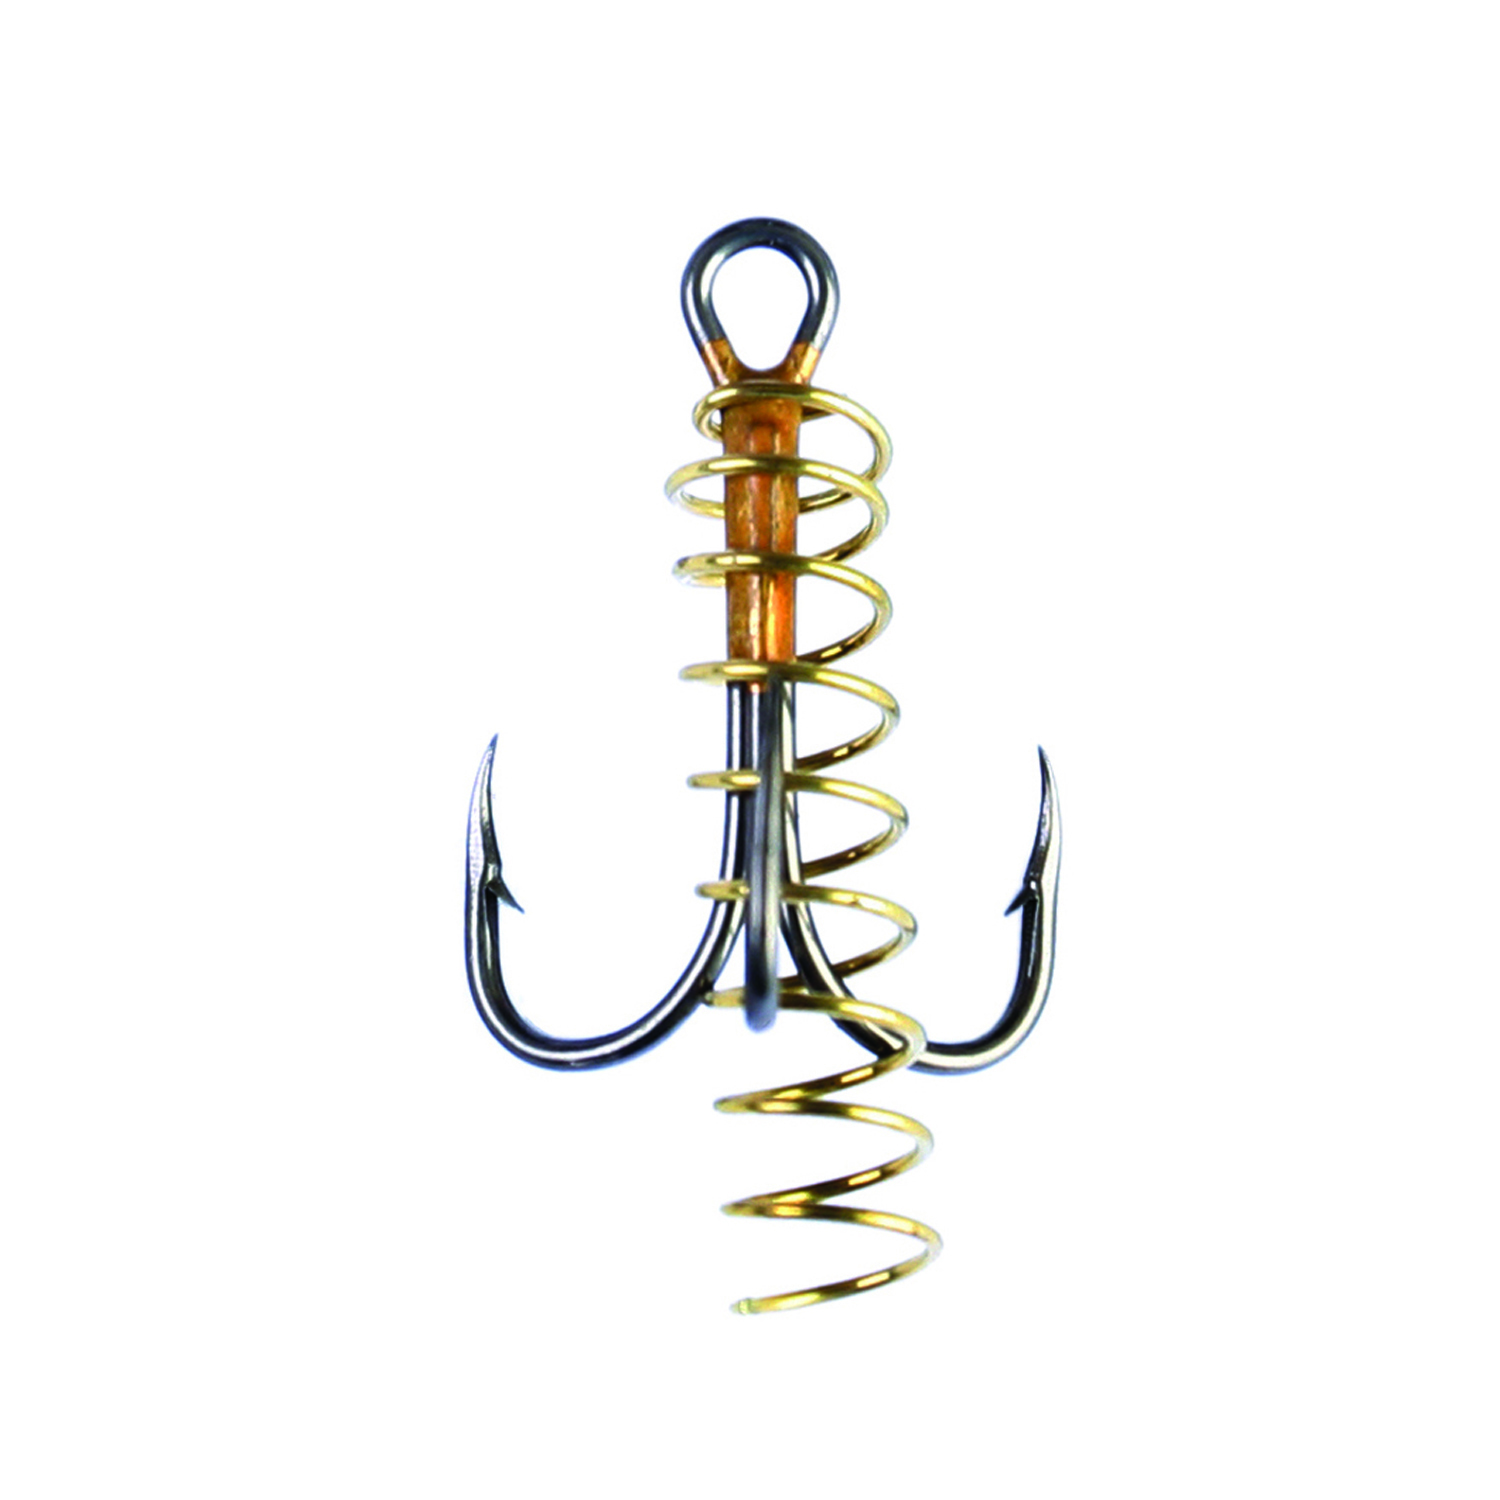 https://op1.0ps.us/original/opplanet-eagle-claw-soft-bait-hook-w-spring-curved-point-2x-strong-bronze-a-pack-hooks-374sba-8-main